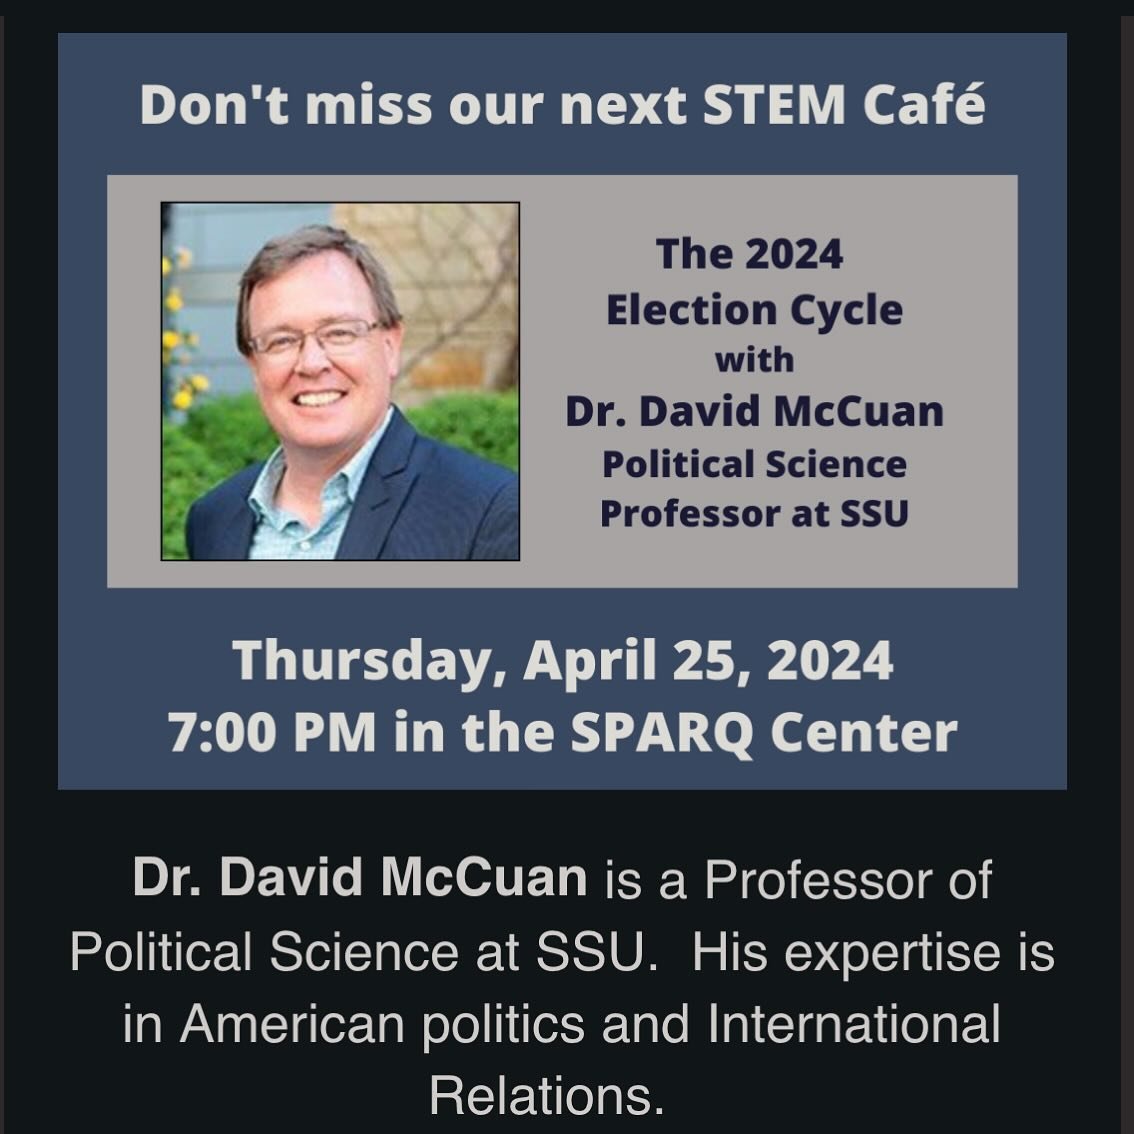 Don&rsquo;t miss our last STEM Cafe of this school year this Thursday at 7!
STEM Level 1 approved
#sparqatphs #stemcafe #pinerhighschool @pinerhighschool @srcschools